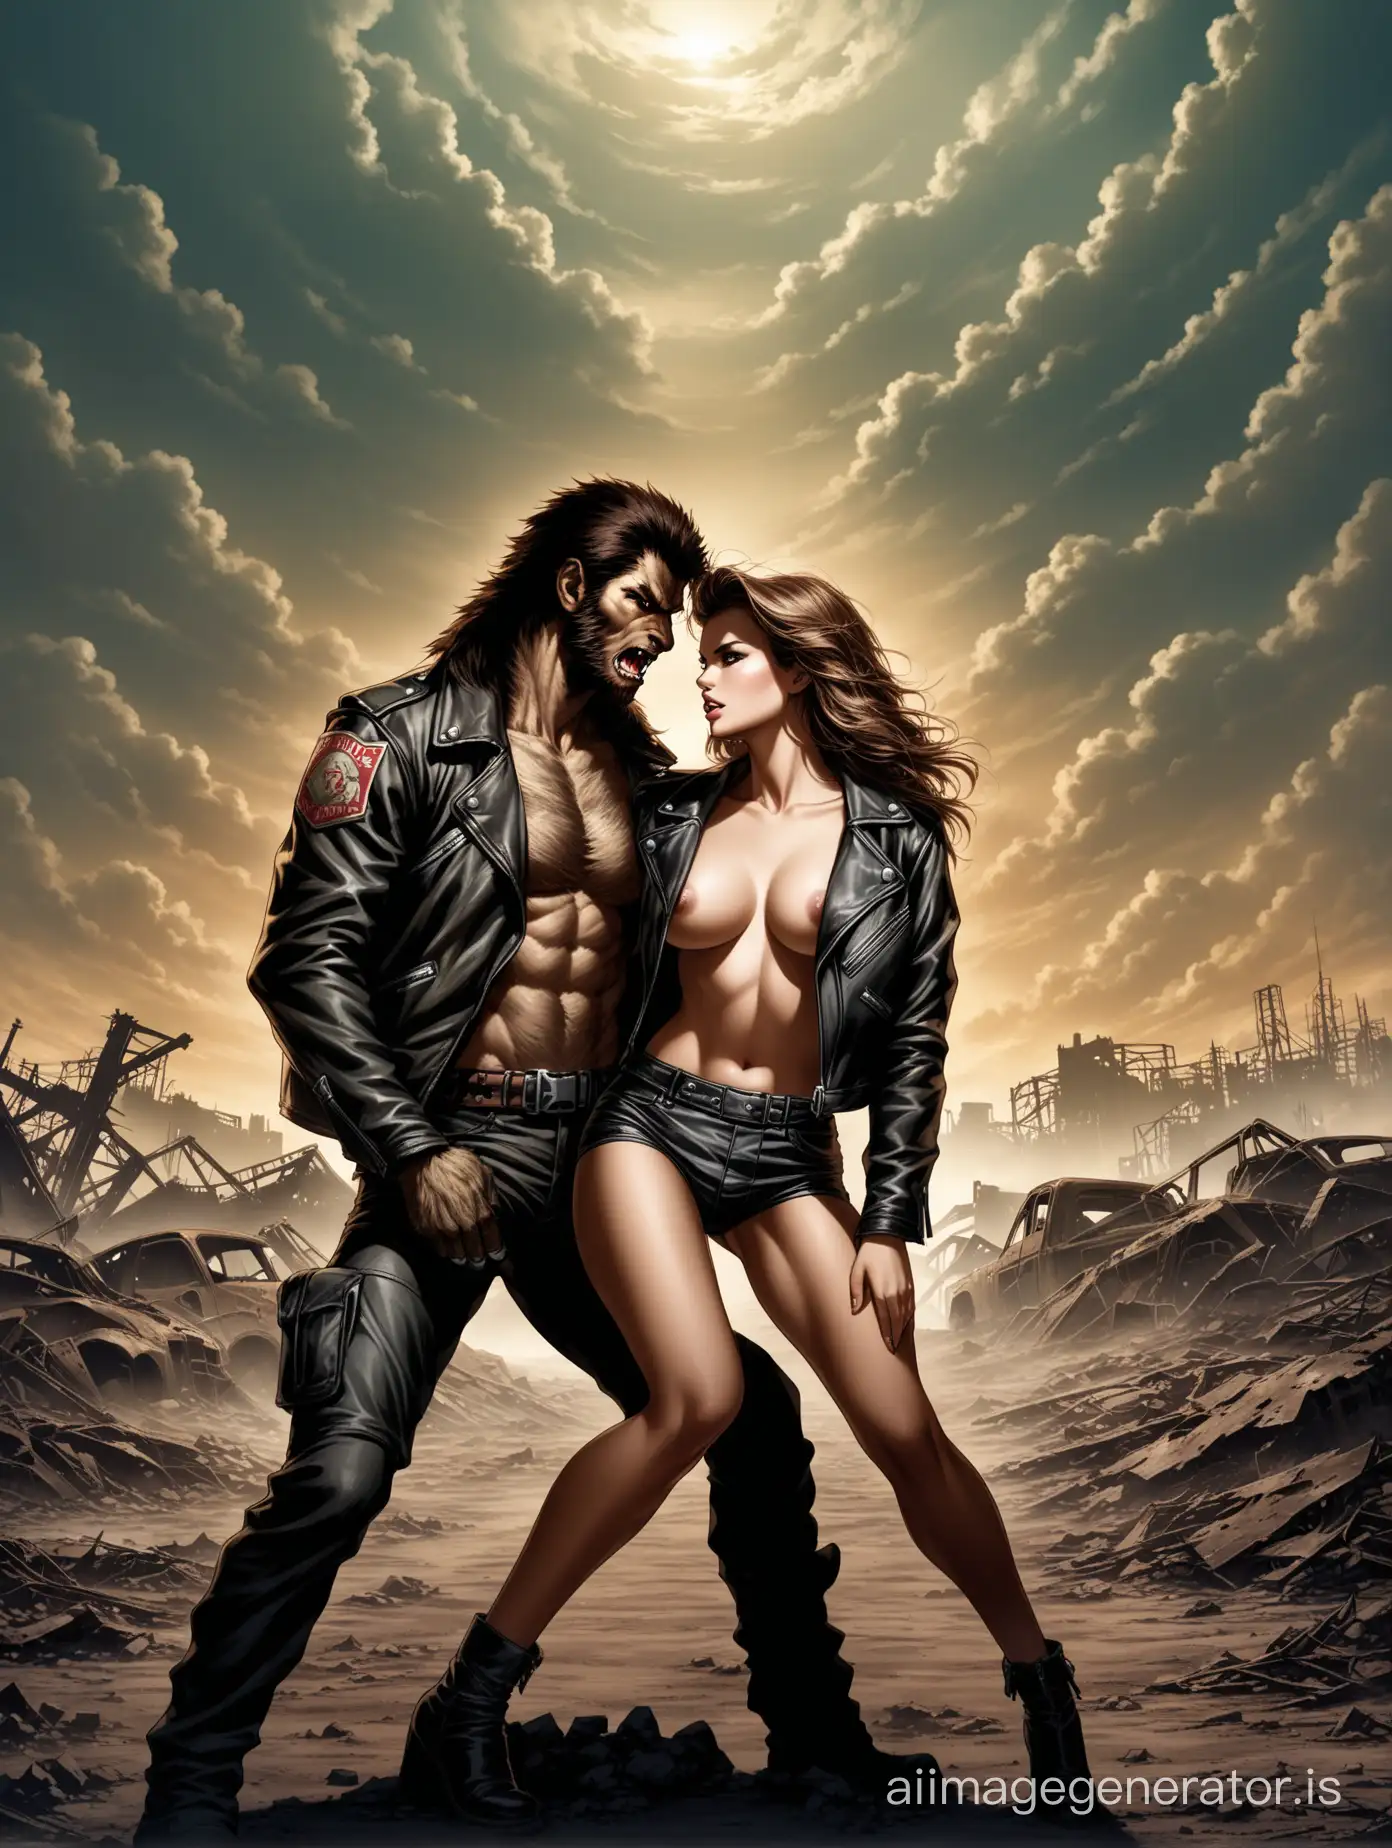 ((Erotic photography));(A werewolf protecting a woman); (background "Fallout"|"Wasteland)";Female model of the 80s, dressed in a biker jacket,dramatic, extreme composition